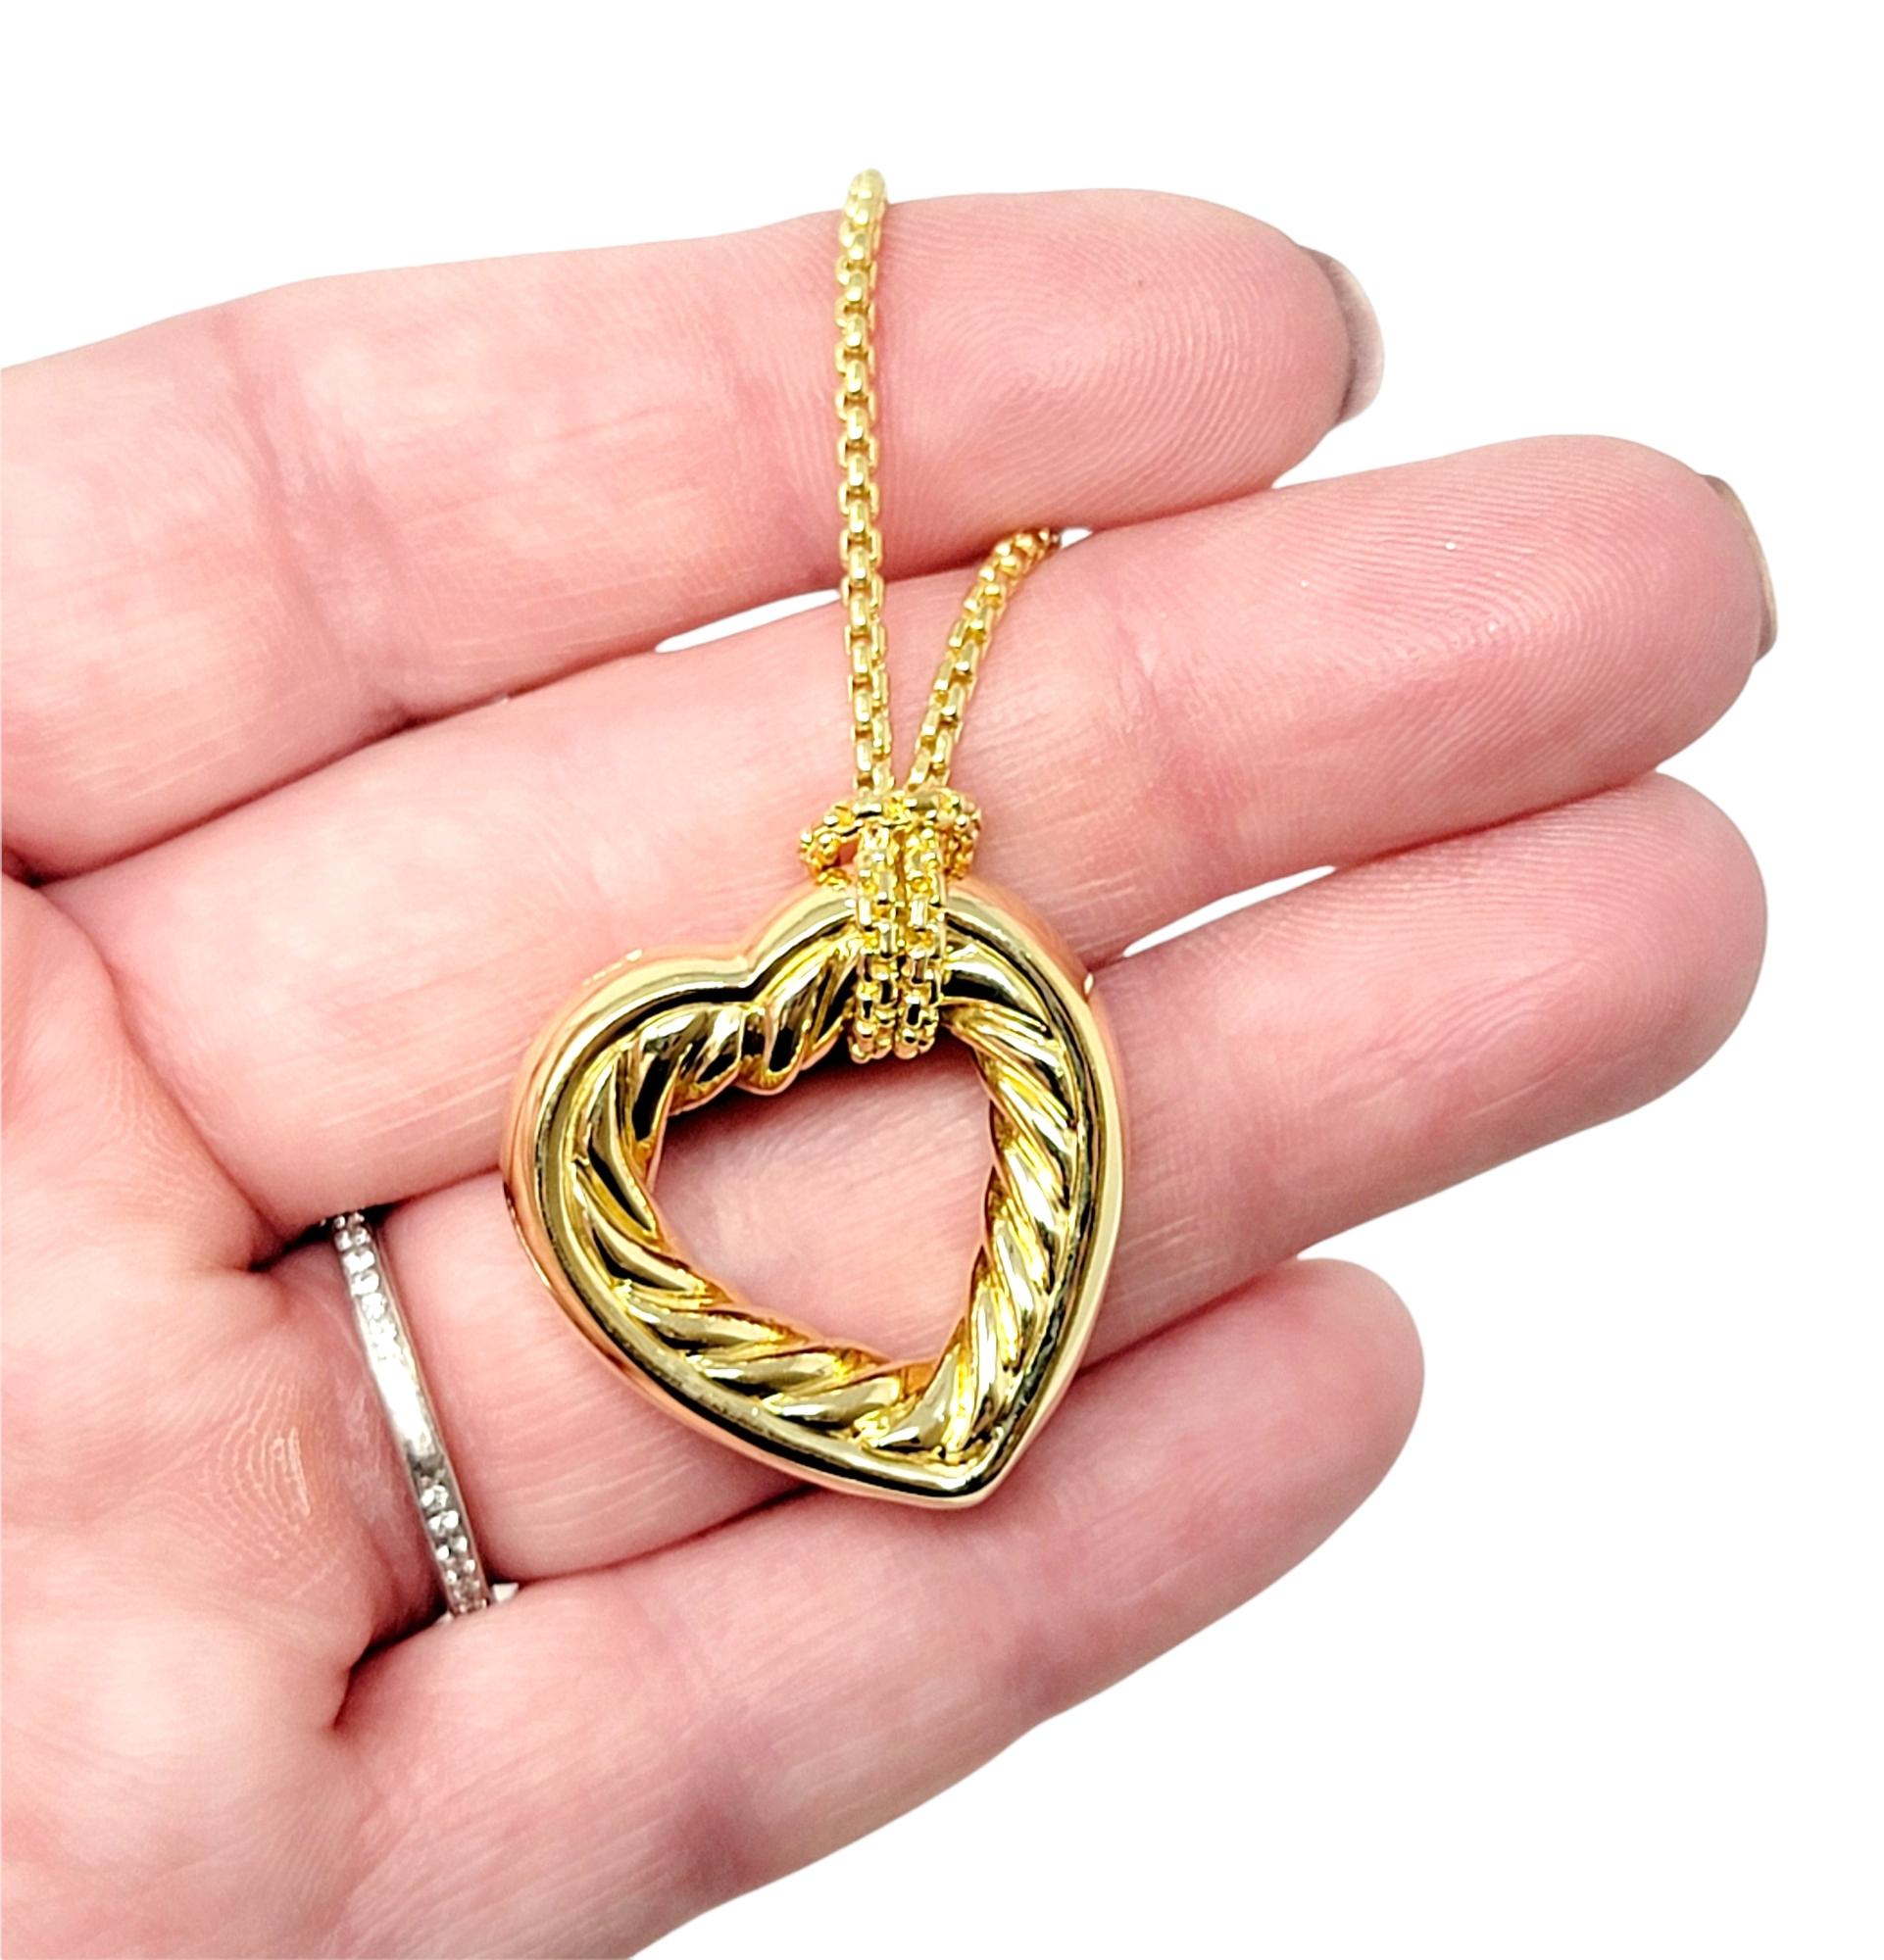 David Yurman 18 Karat Yellow Gold Open Heart Cable Pendant Necklace Box Chain In Excellent Condition For Sale In Scottsdale, AZ